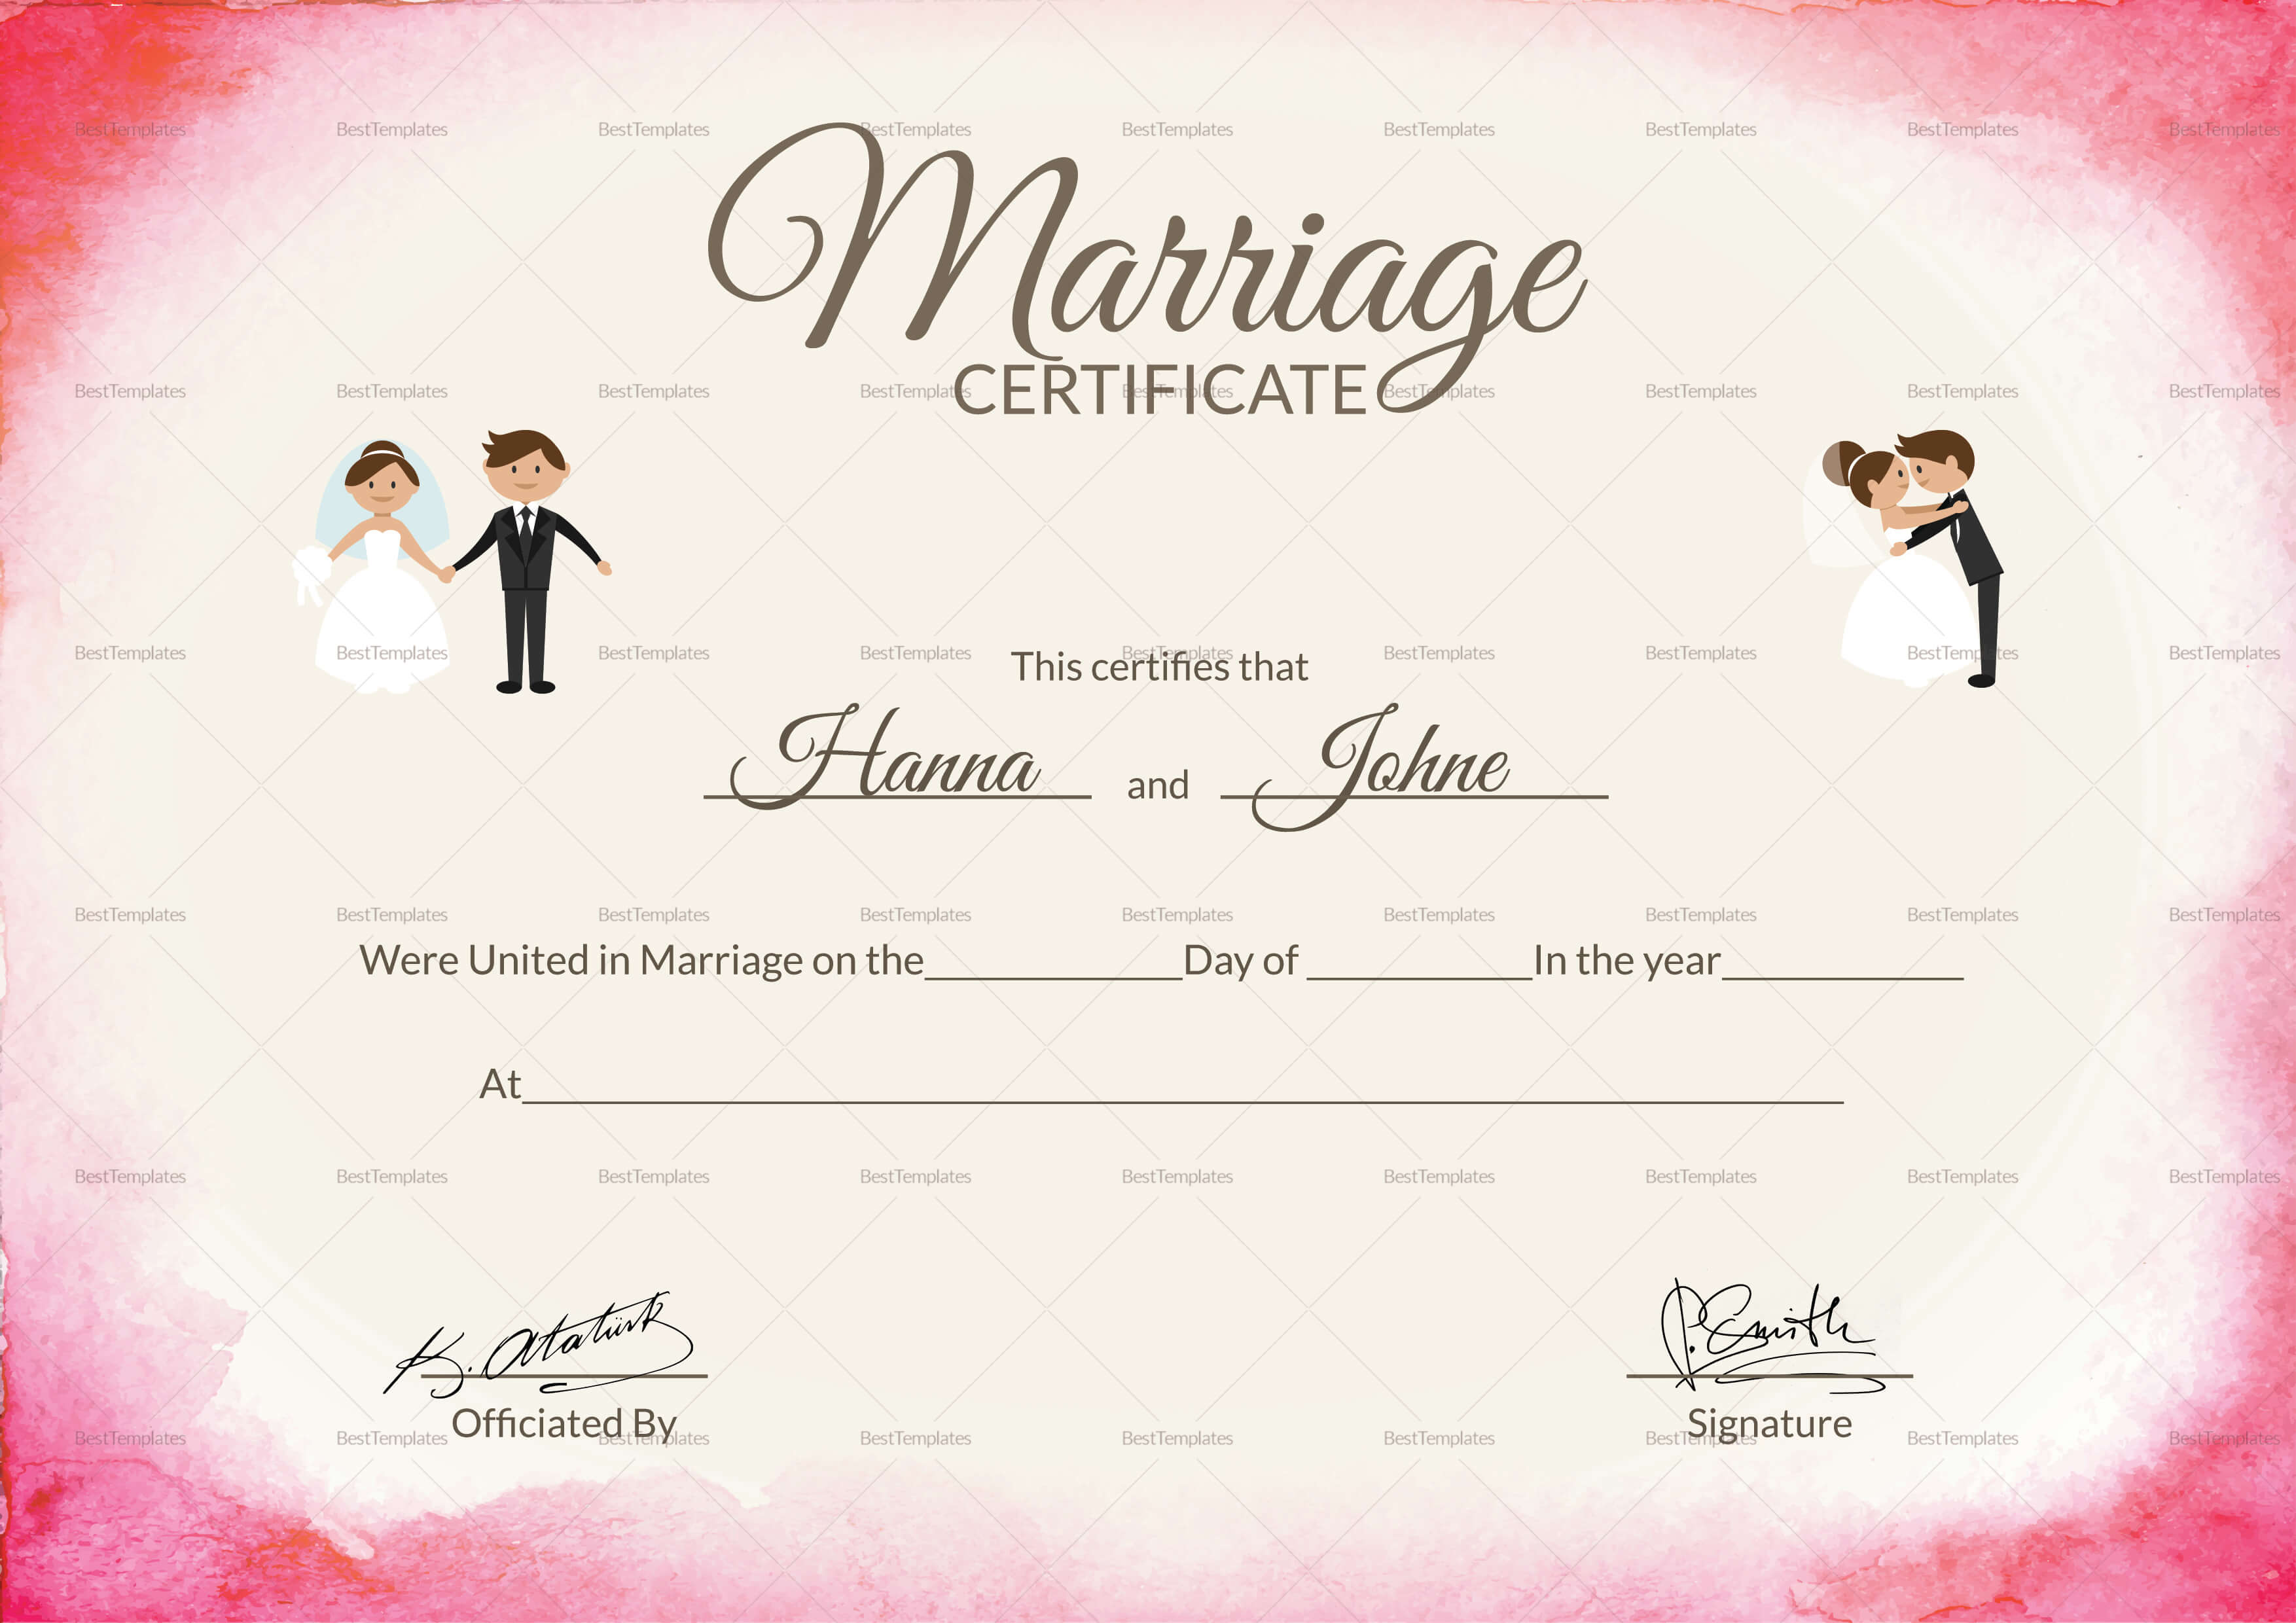 Certificate Of Marriage Template